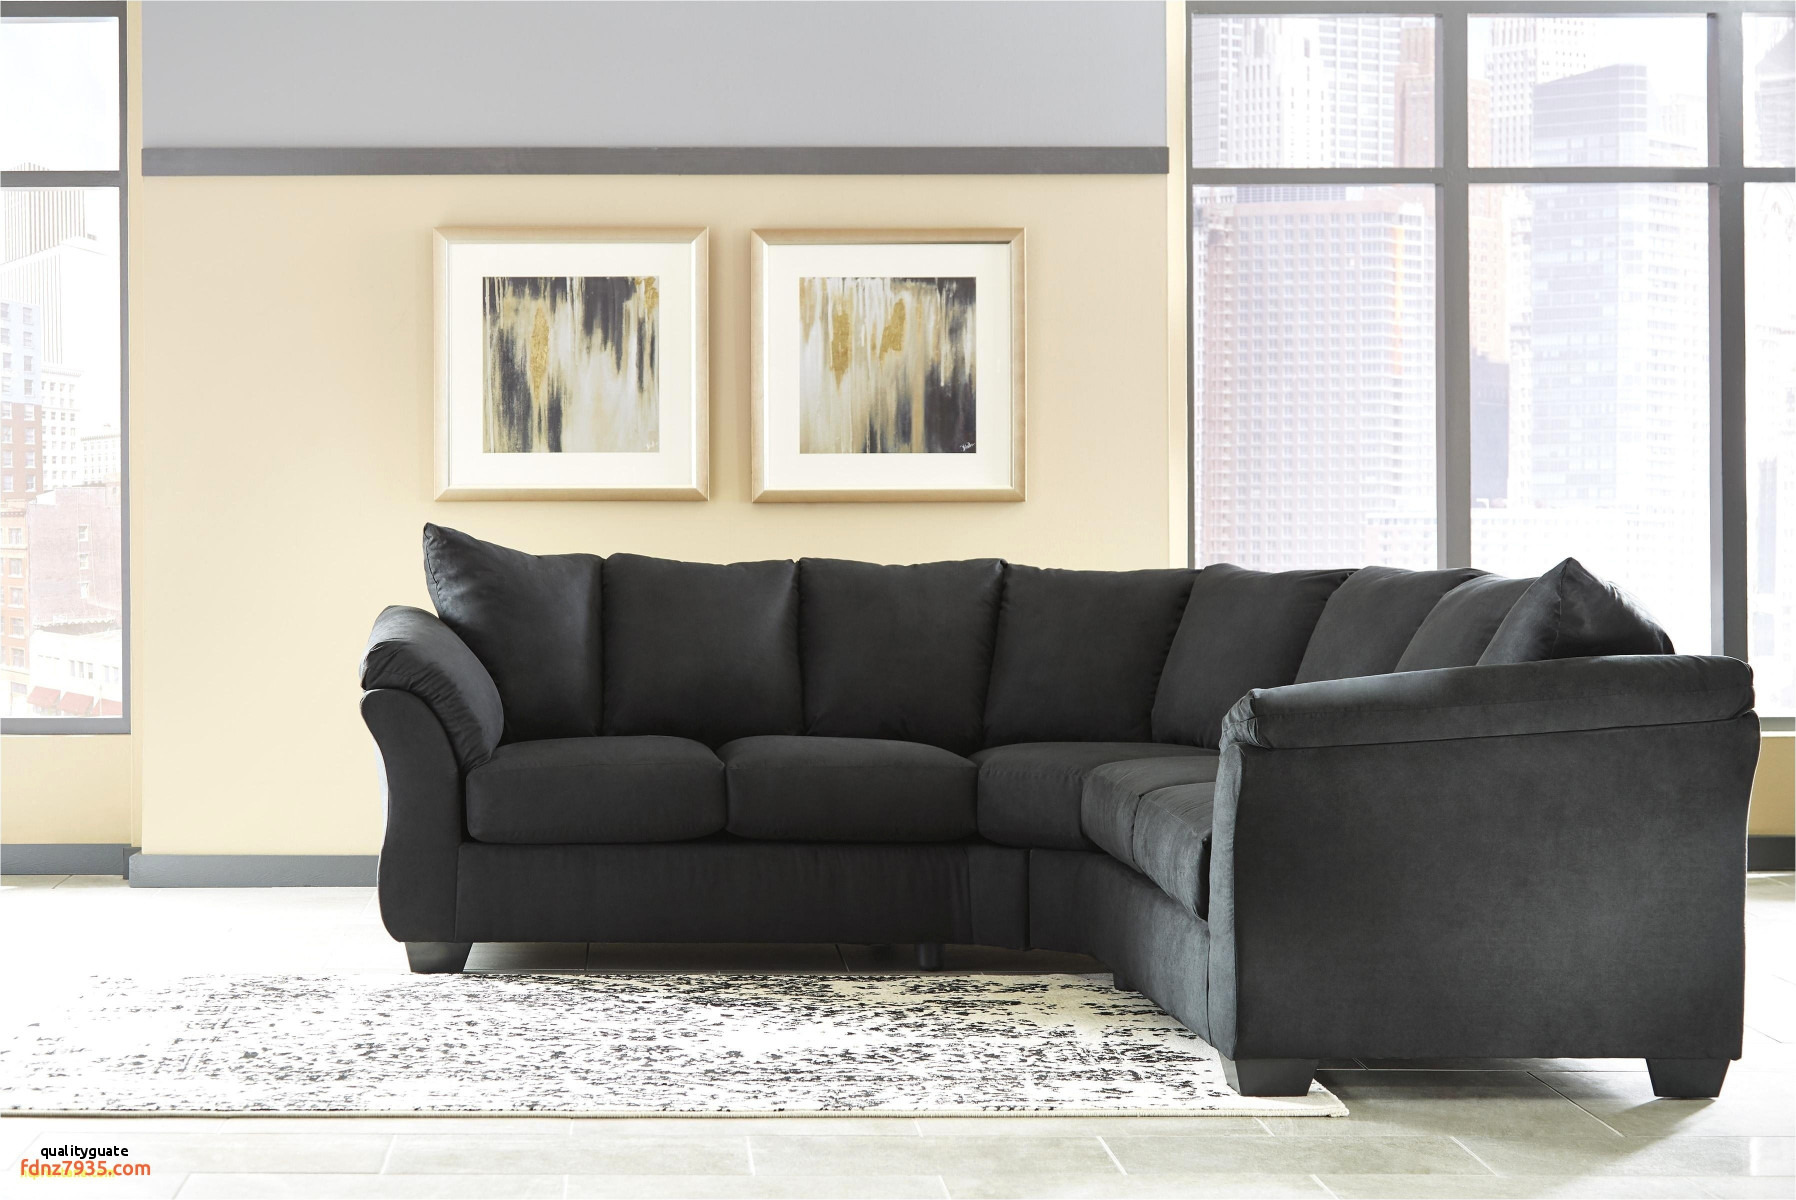 10 Best Of Contemporary Sofa Set Images - Couch , HD Wallpaper & Backgrounds